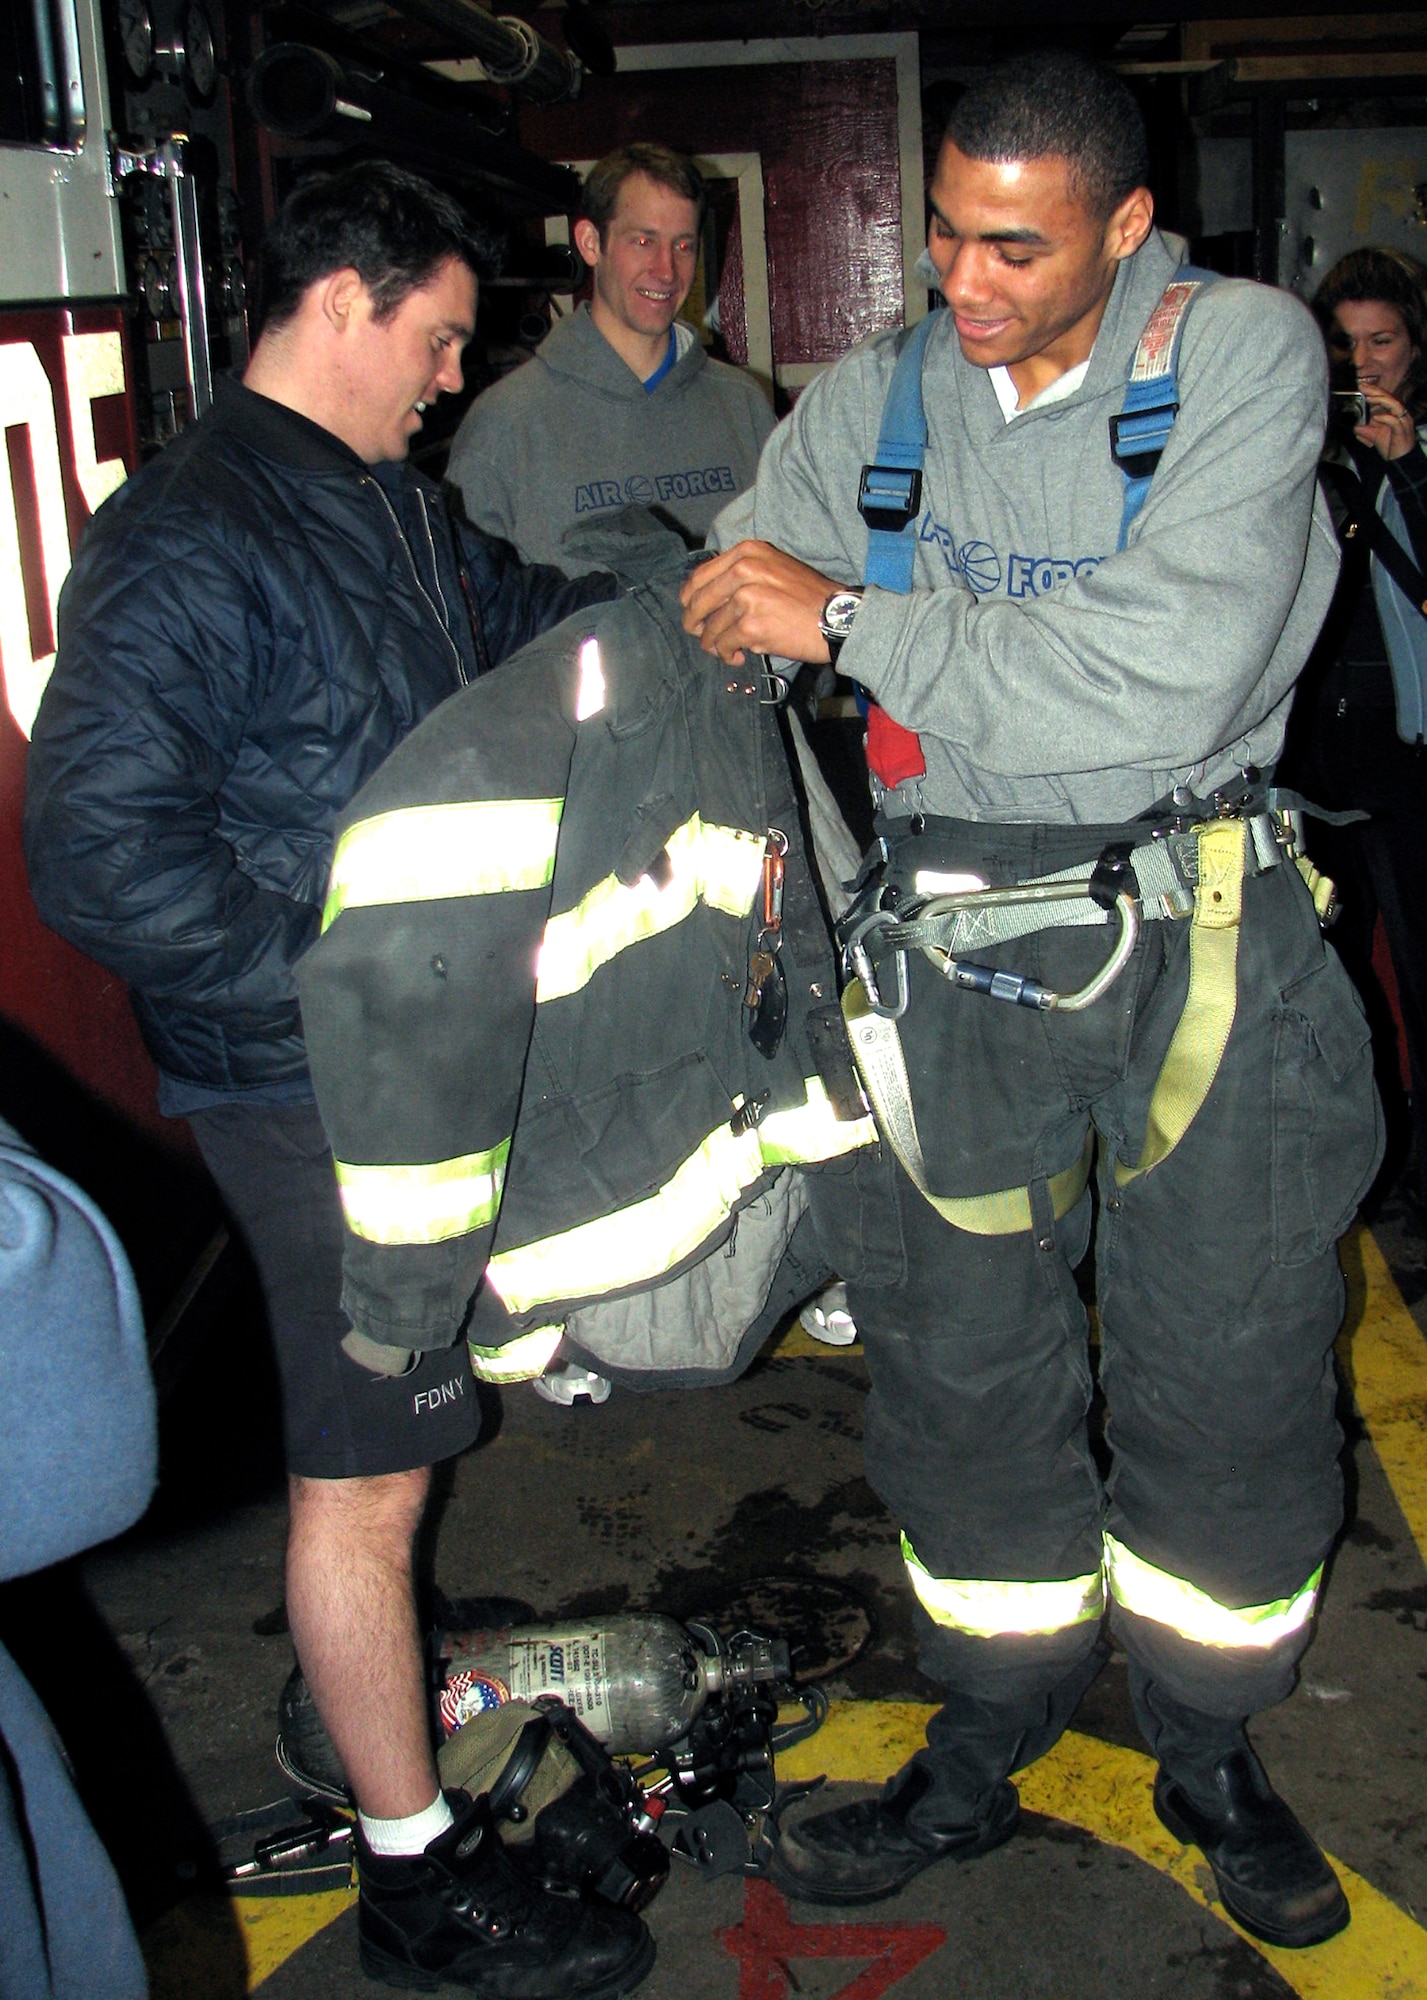 Cadet 1st Class Matt McCraw puts on a fireman's coat March 25 during a tour of the Engine 54 fire station in New York City. The senior is a member of the U.S. Air Force Academy men's basketball team, and is playing in the National Invitation Tournament semifinals March 27 against the Clemson Tigers in Madison Square Garden. (U.S. Air Force photo/Staff Sgt. Steve Grever) 